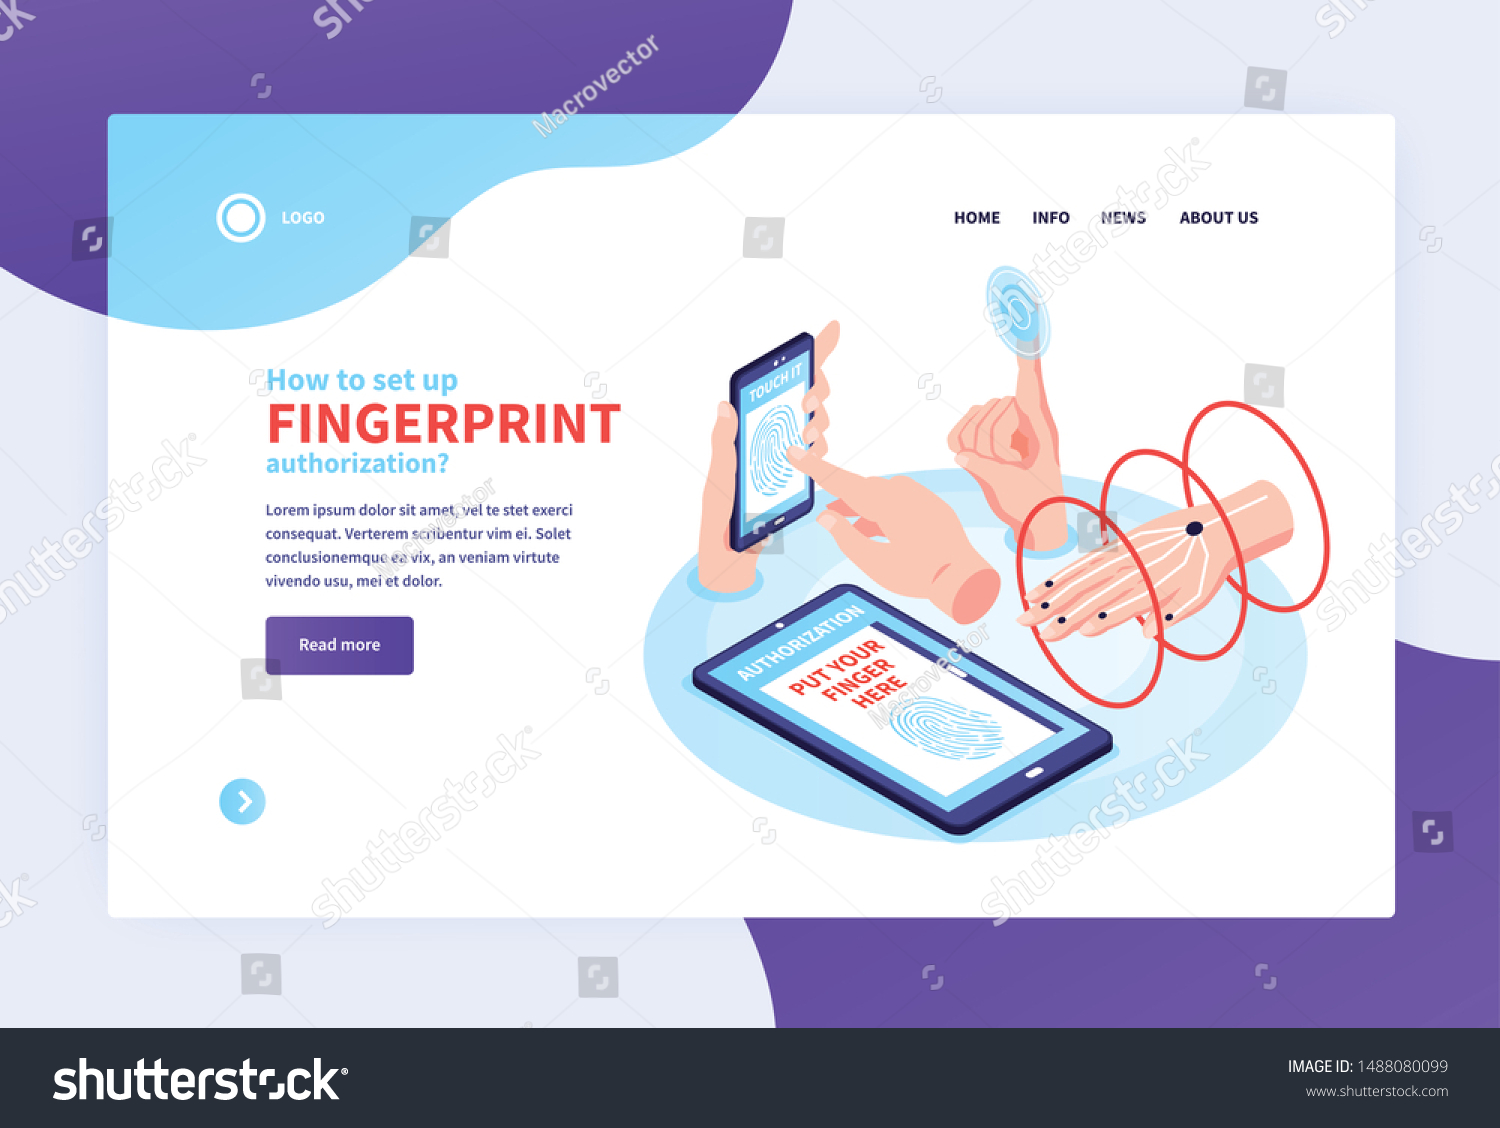 SVG of Isometric biometric identification concept banner web site landing page with clickable links and human hand images vector illustration svg